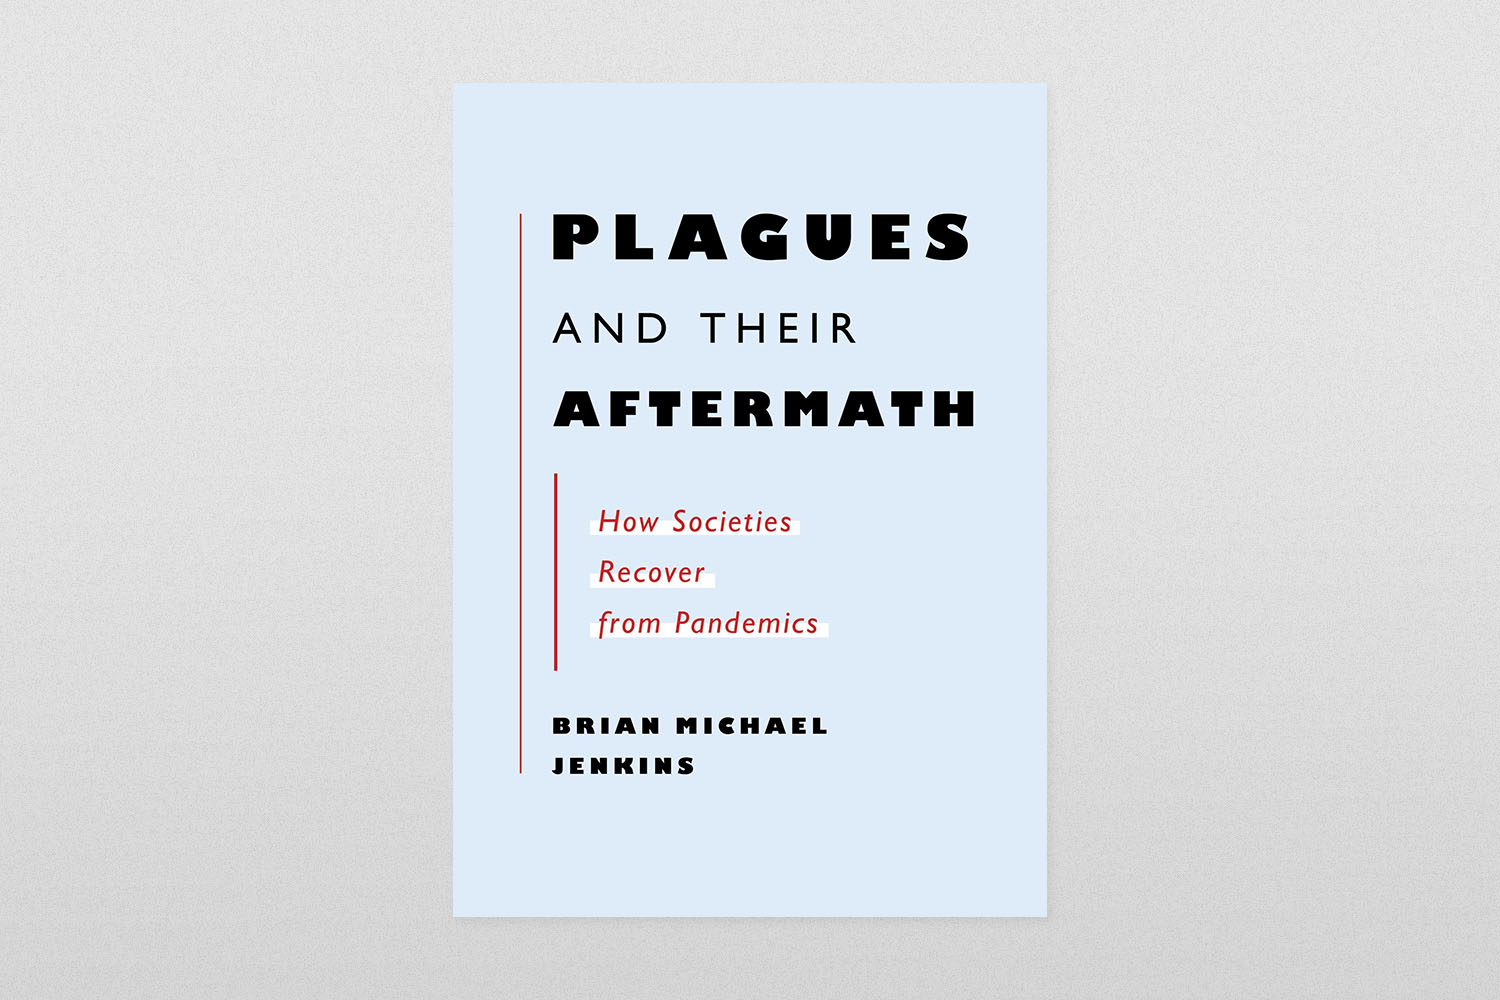 Plagues and Their Aftermath